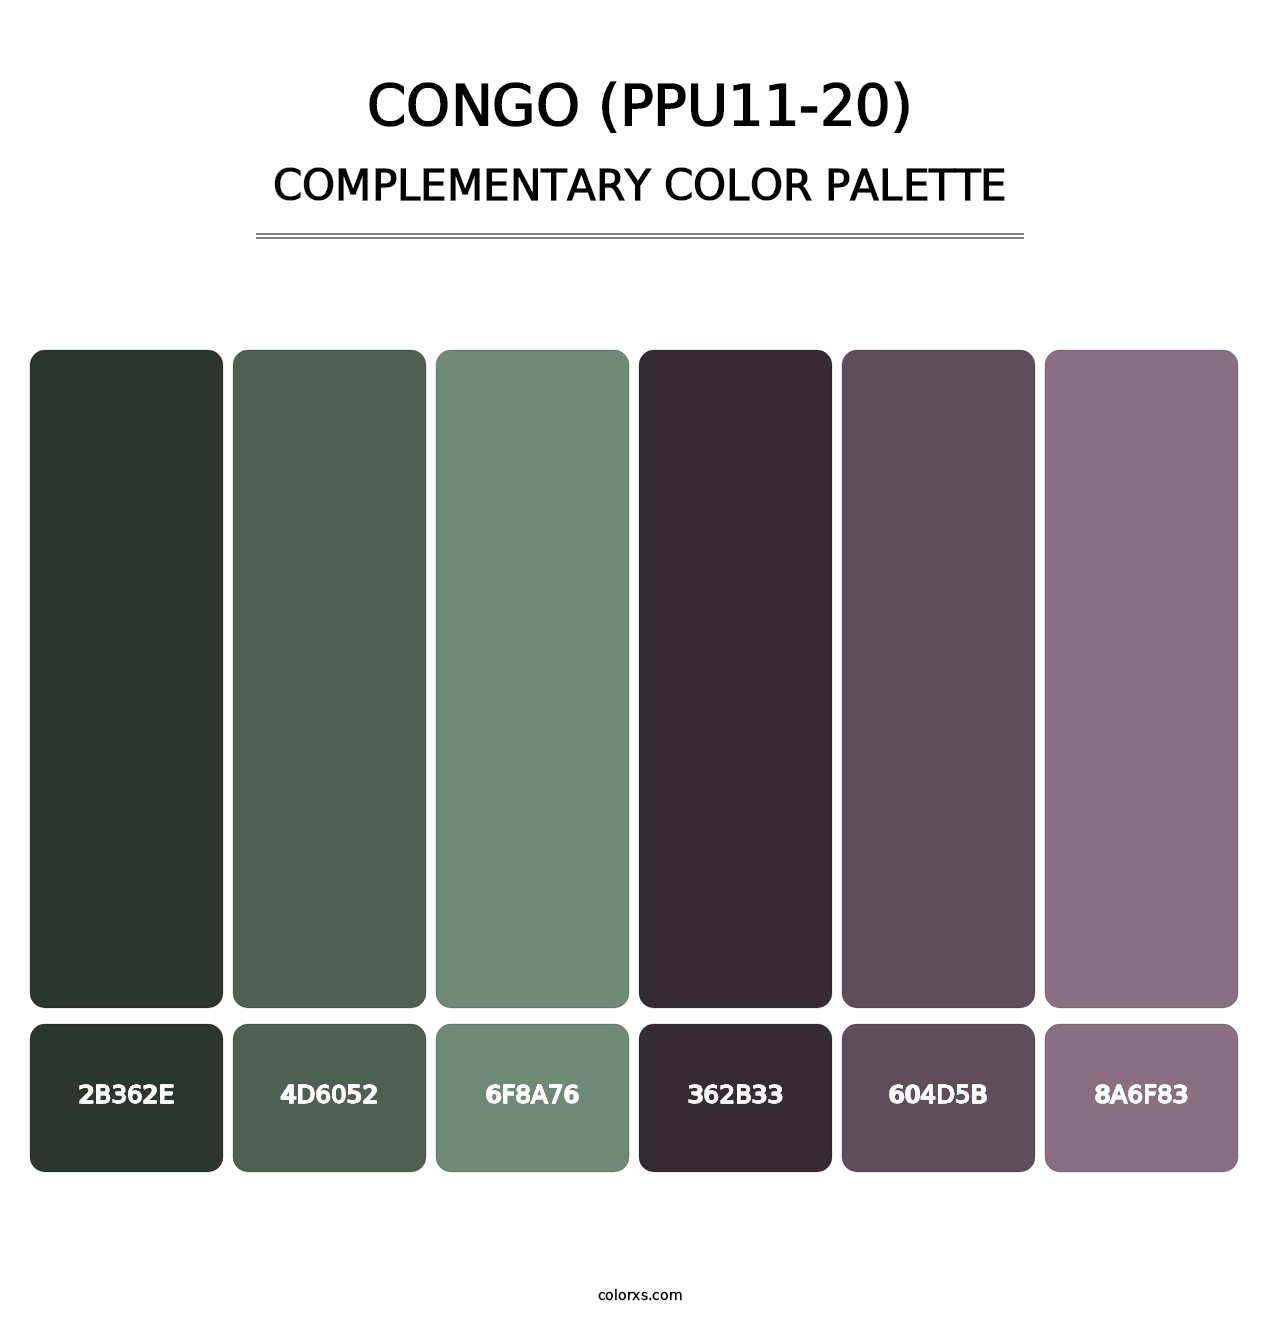 Congo (PPU11-20) - Complementary Color Palette